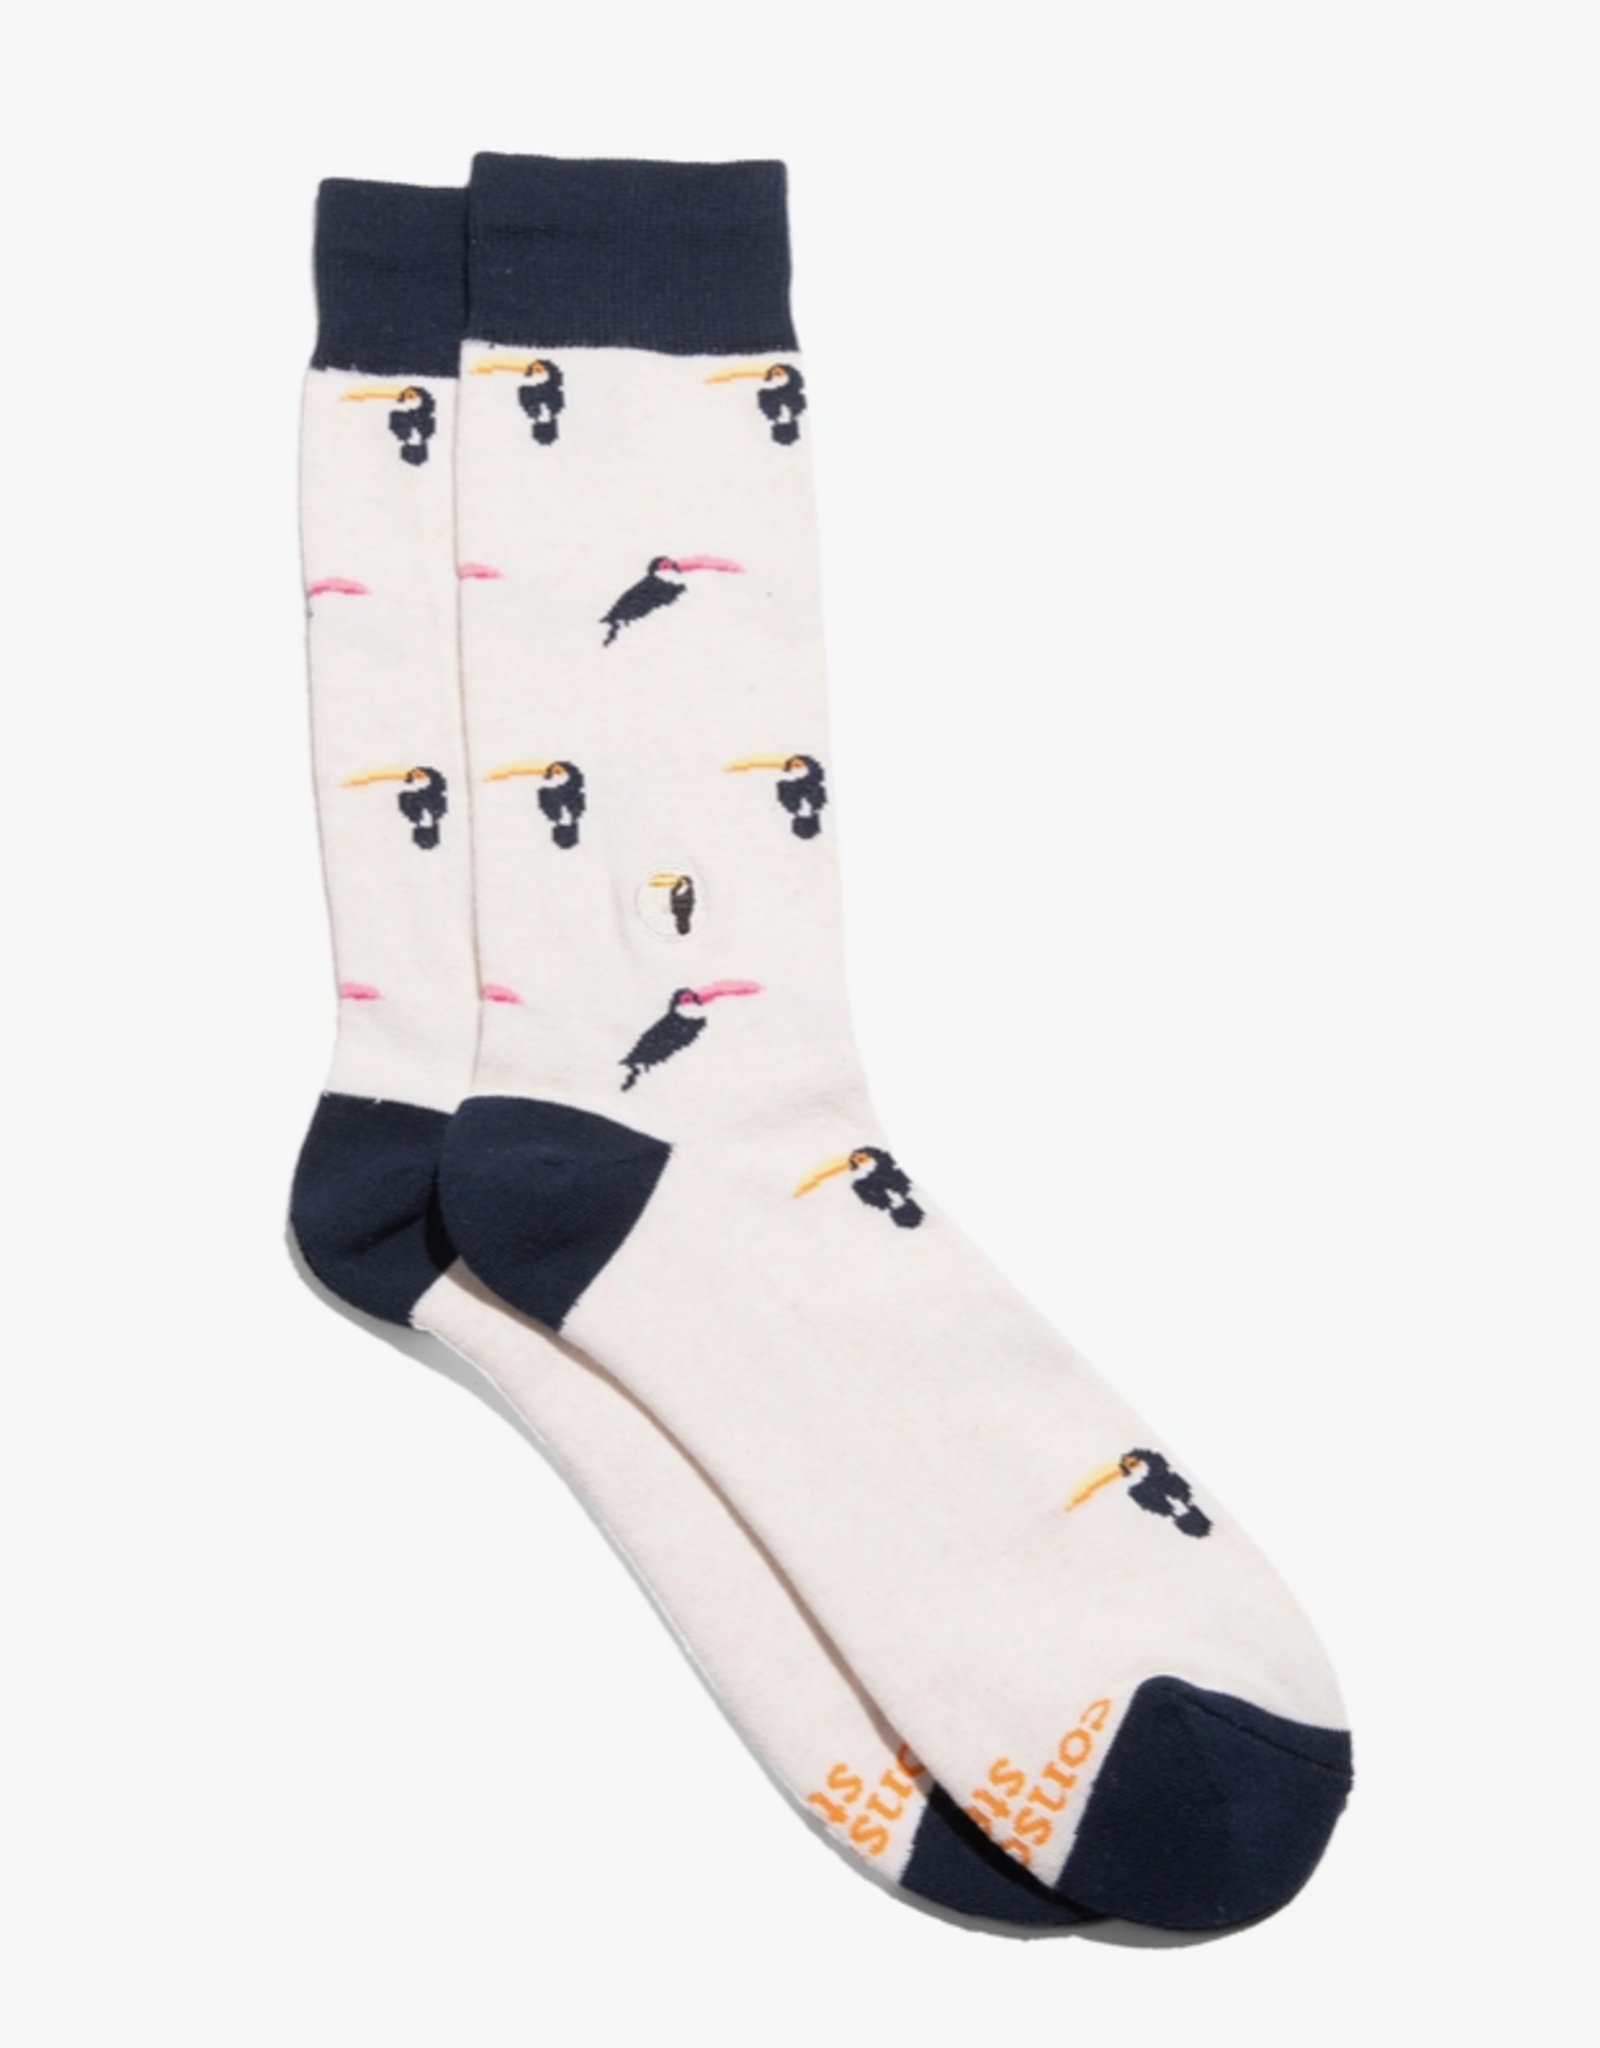 Conscious Step Socks that Protect Toucans (Black & Ivory)